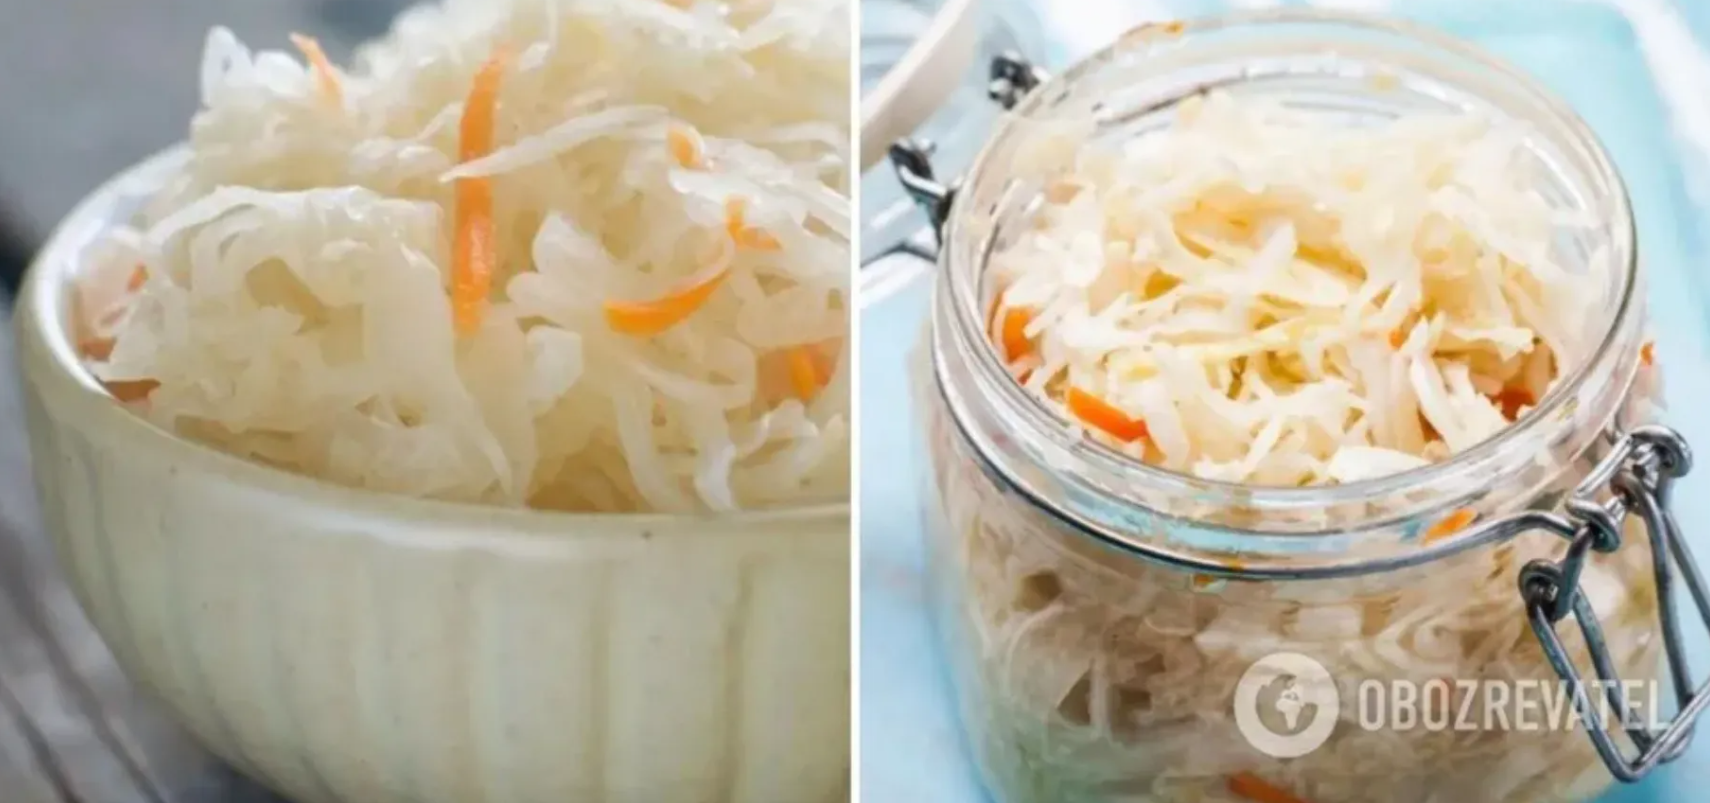 How to cook sauerkraut deliciously and correctly